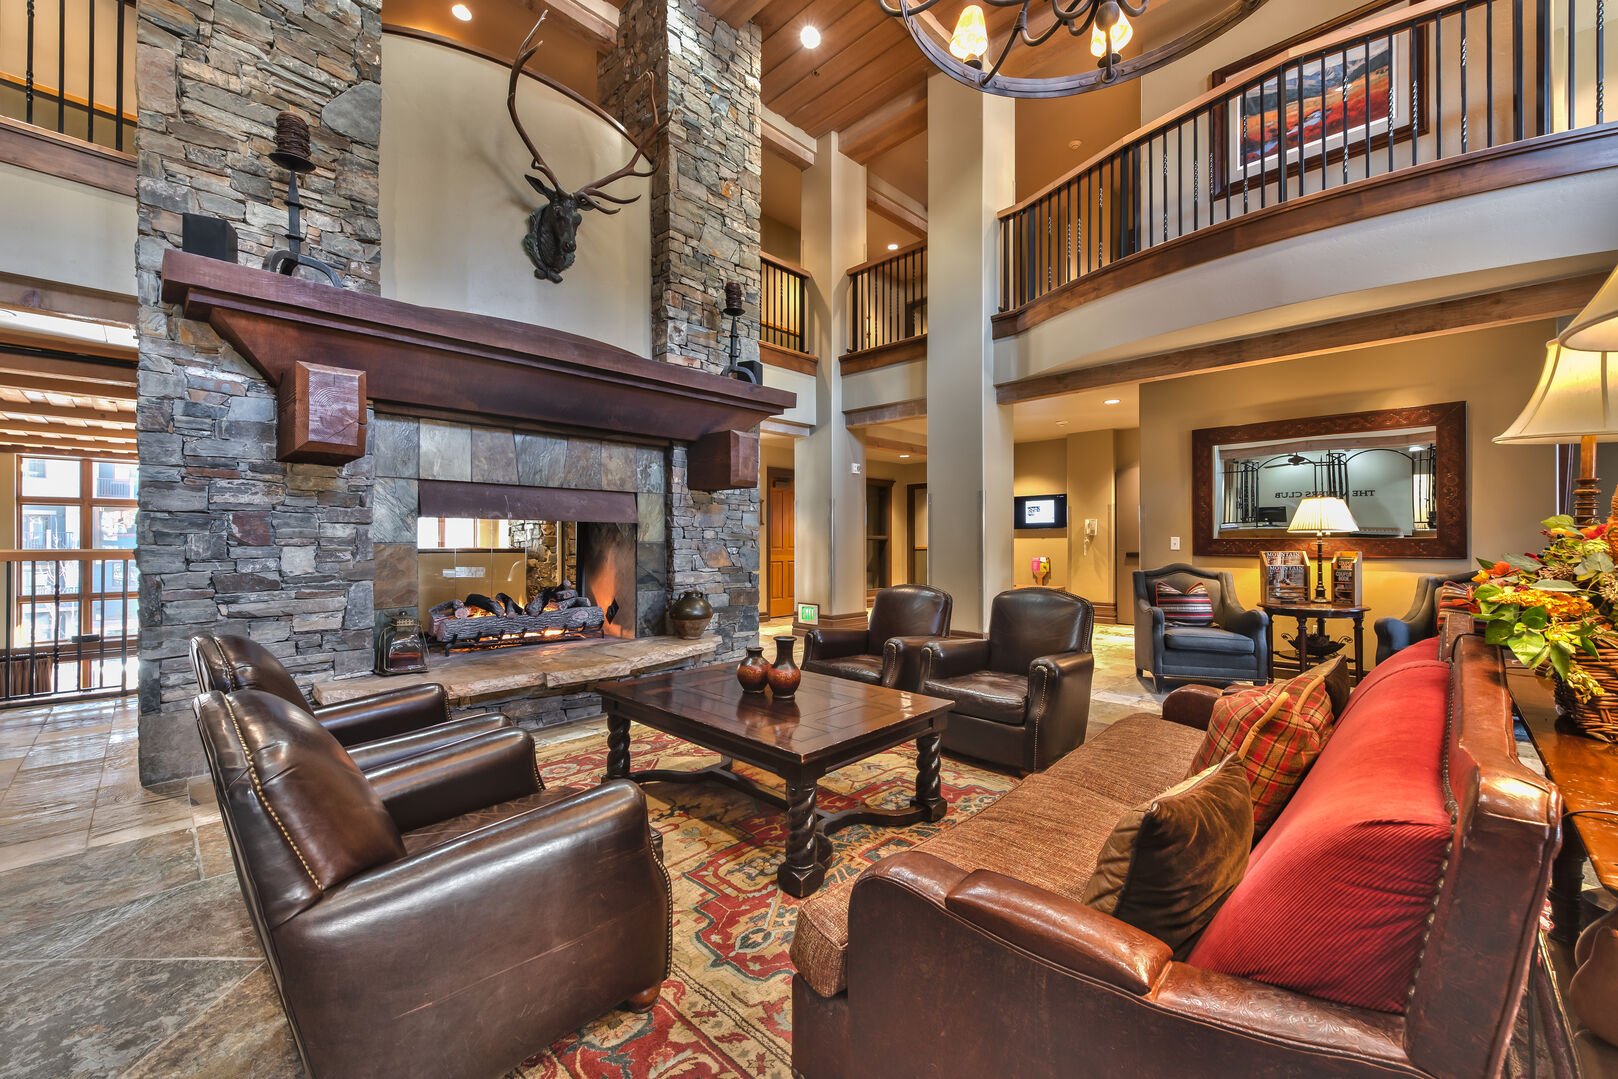 Main lobby with large fireplace